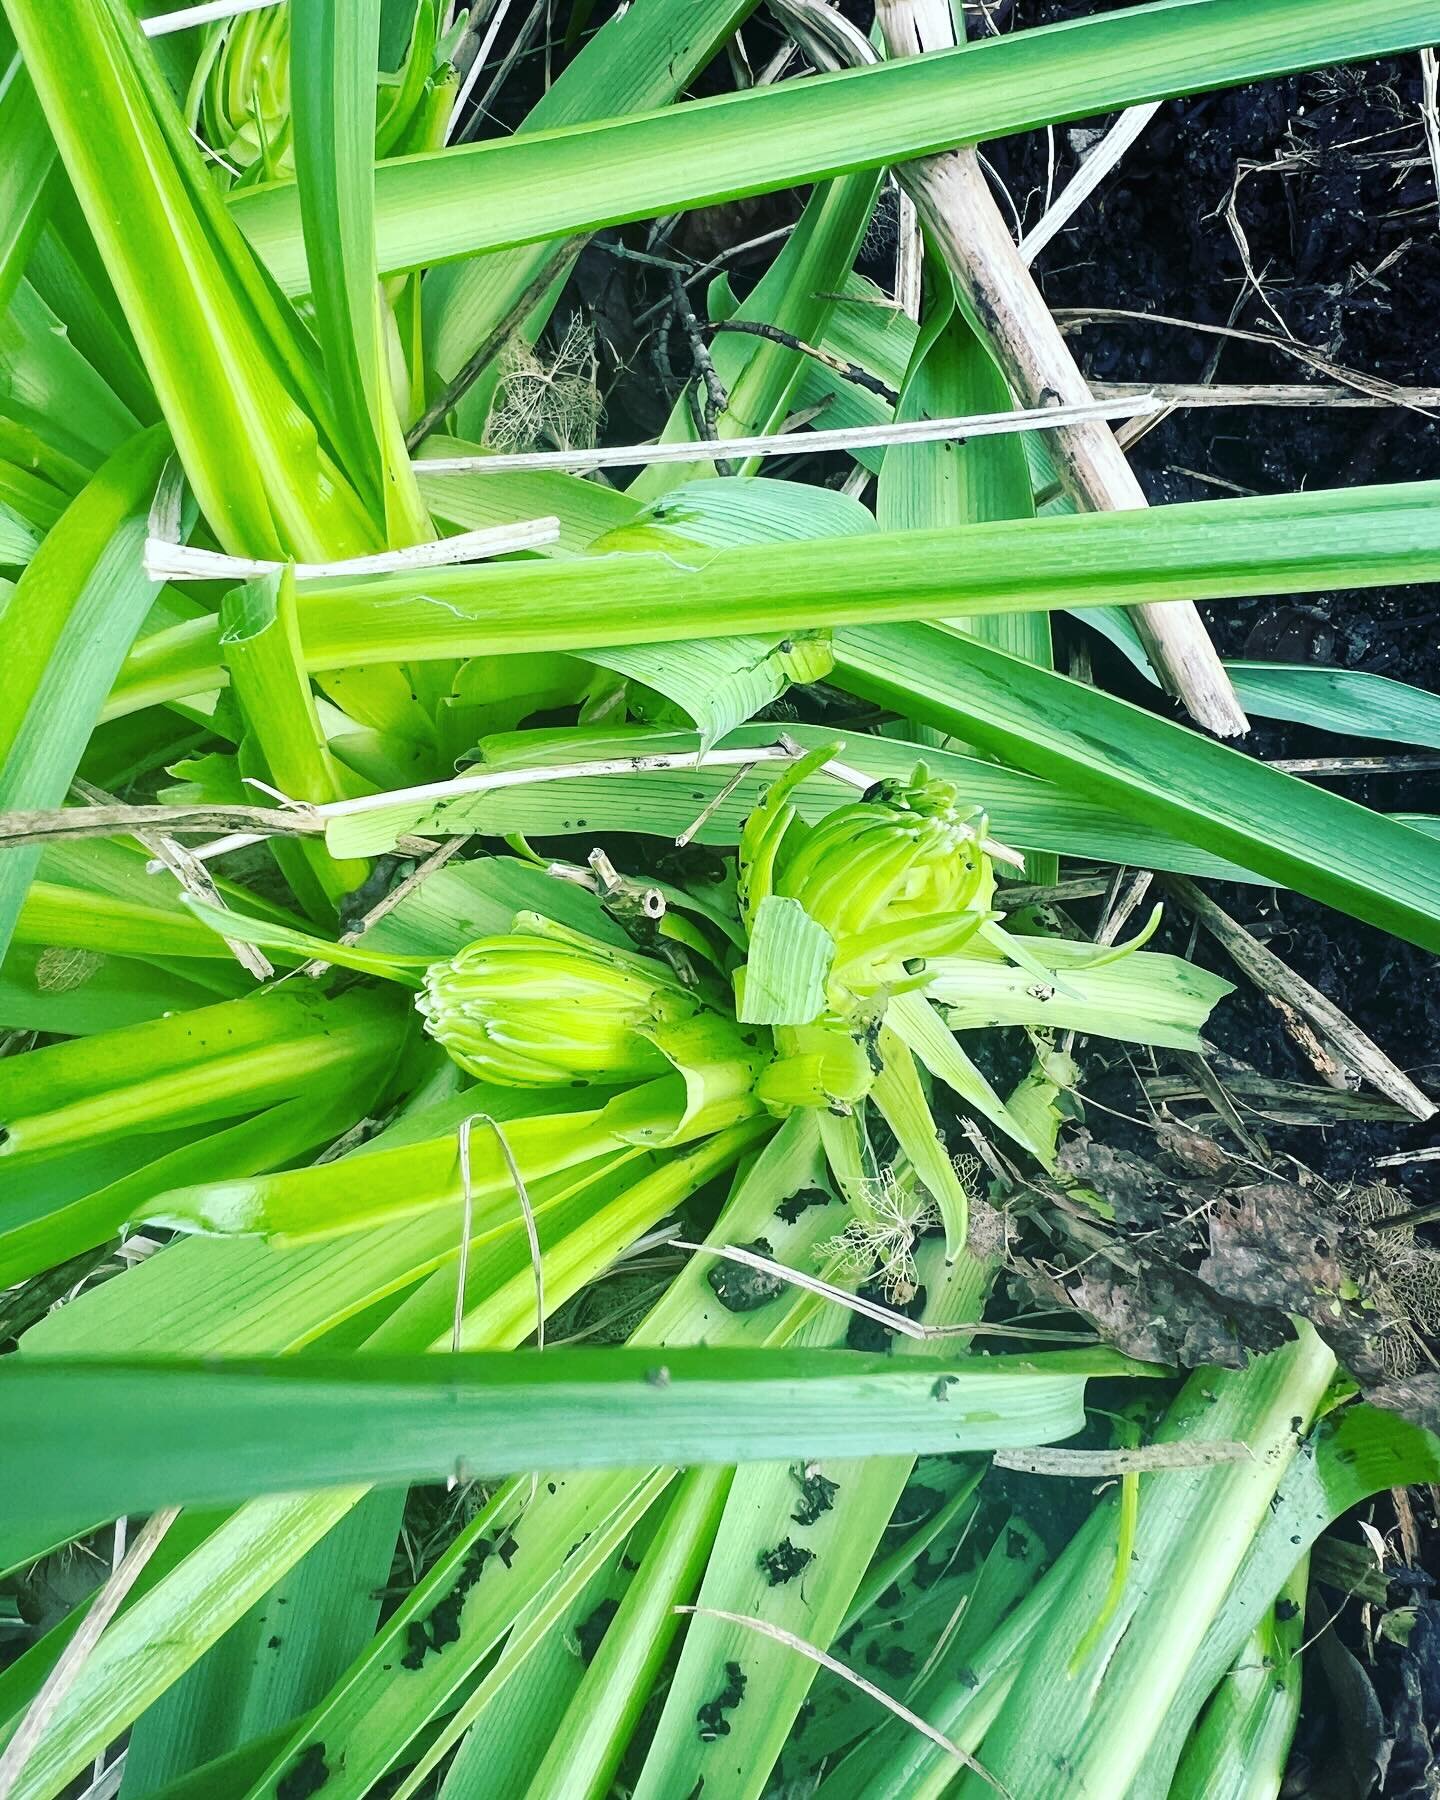 Can someone please tell these Camassia to stop growing.  It&rsquo;s march and they don&rsquo;t flower till May! 🪴🌱🌷#floweringtooearly #stopgrowing #gardener #horticulture #growyourown #planting #backyardgarden #greenthumb #gardeningtips #gardenlov